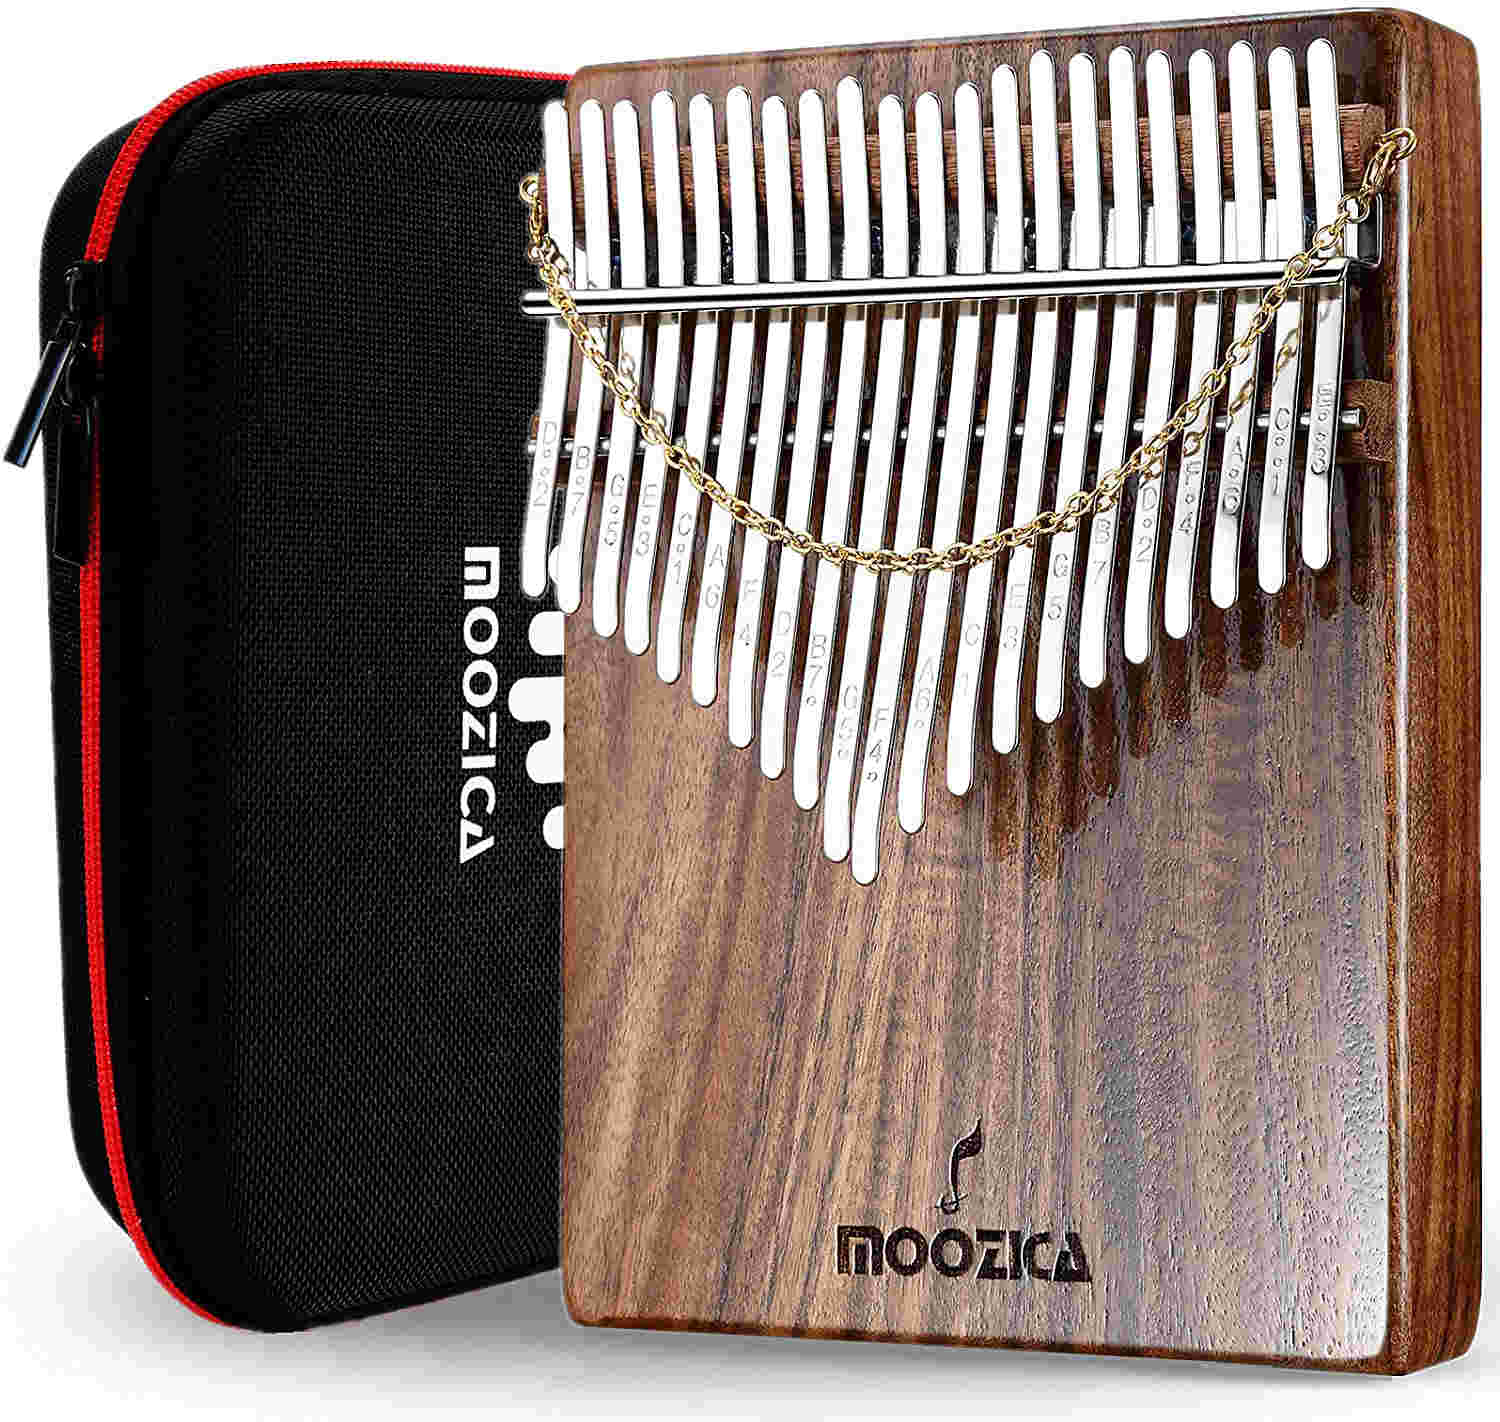 Portable Musical Instrument Gifts for Kids Adult Beginners Professionals Builts in Study instruction TOPQSC Kalimba Thumb Piano,21 key range is wider